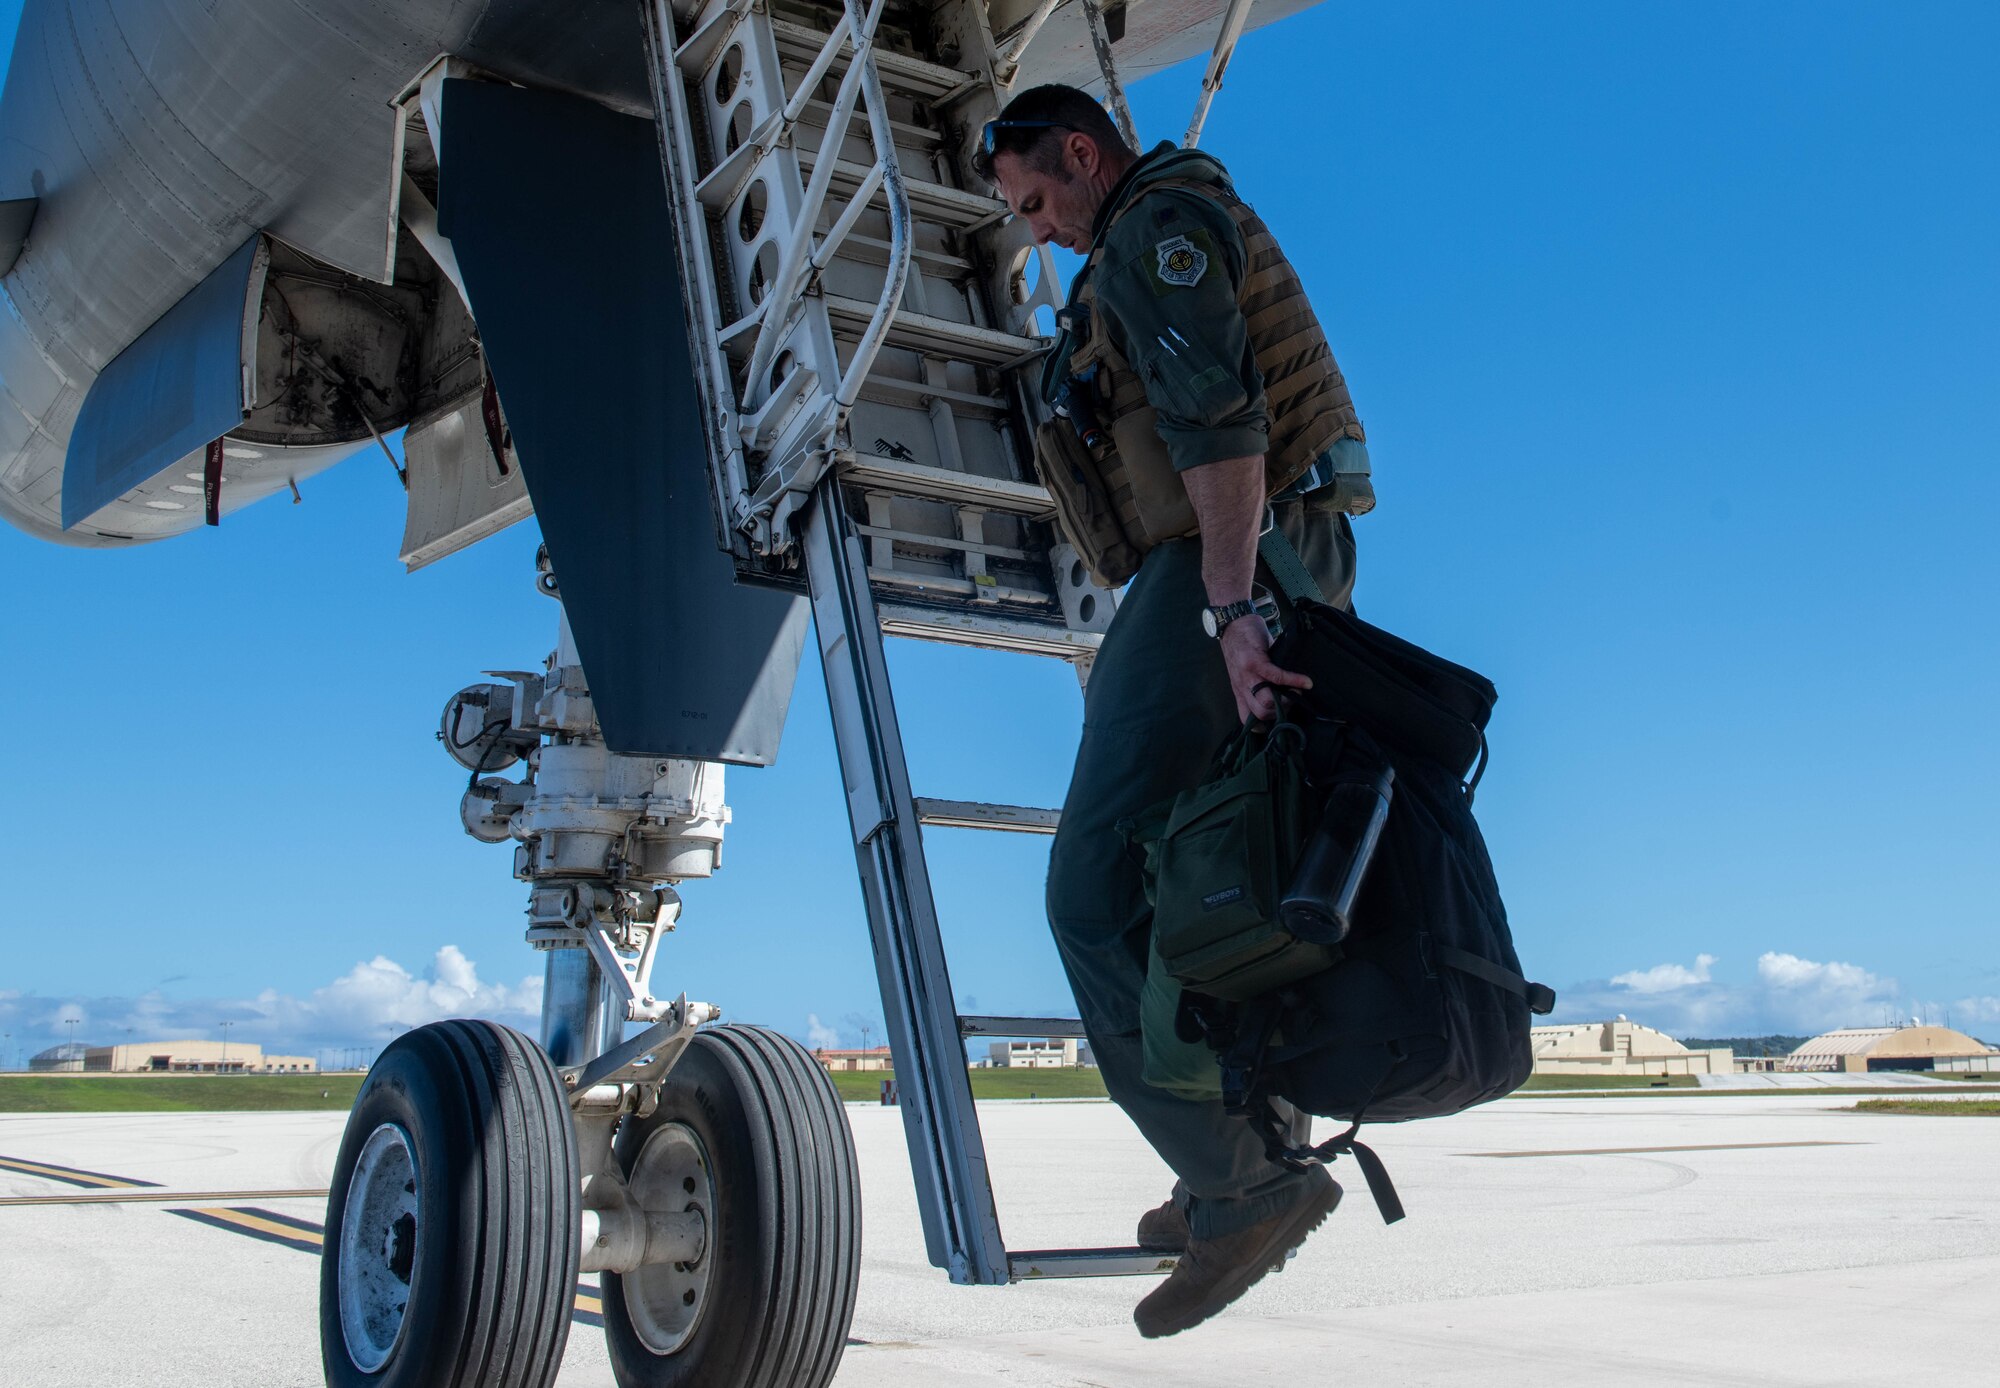 U.S. Air Force Lt. Col. Ross Hobbs, the commander of the 34th Bomb Squadron, exits a B-1B Lancer on Andersen Air Force Base, Guam, after landing for a Bomber Task Force mission on June 2, 2022.